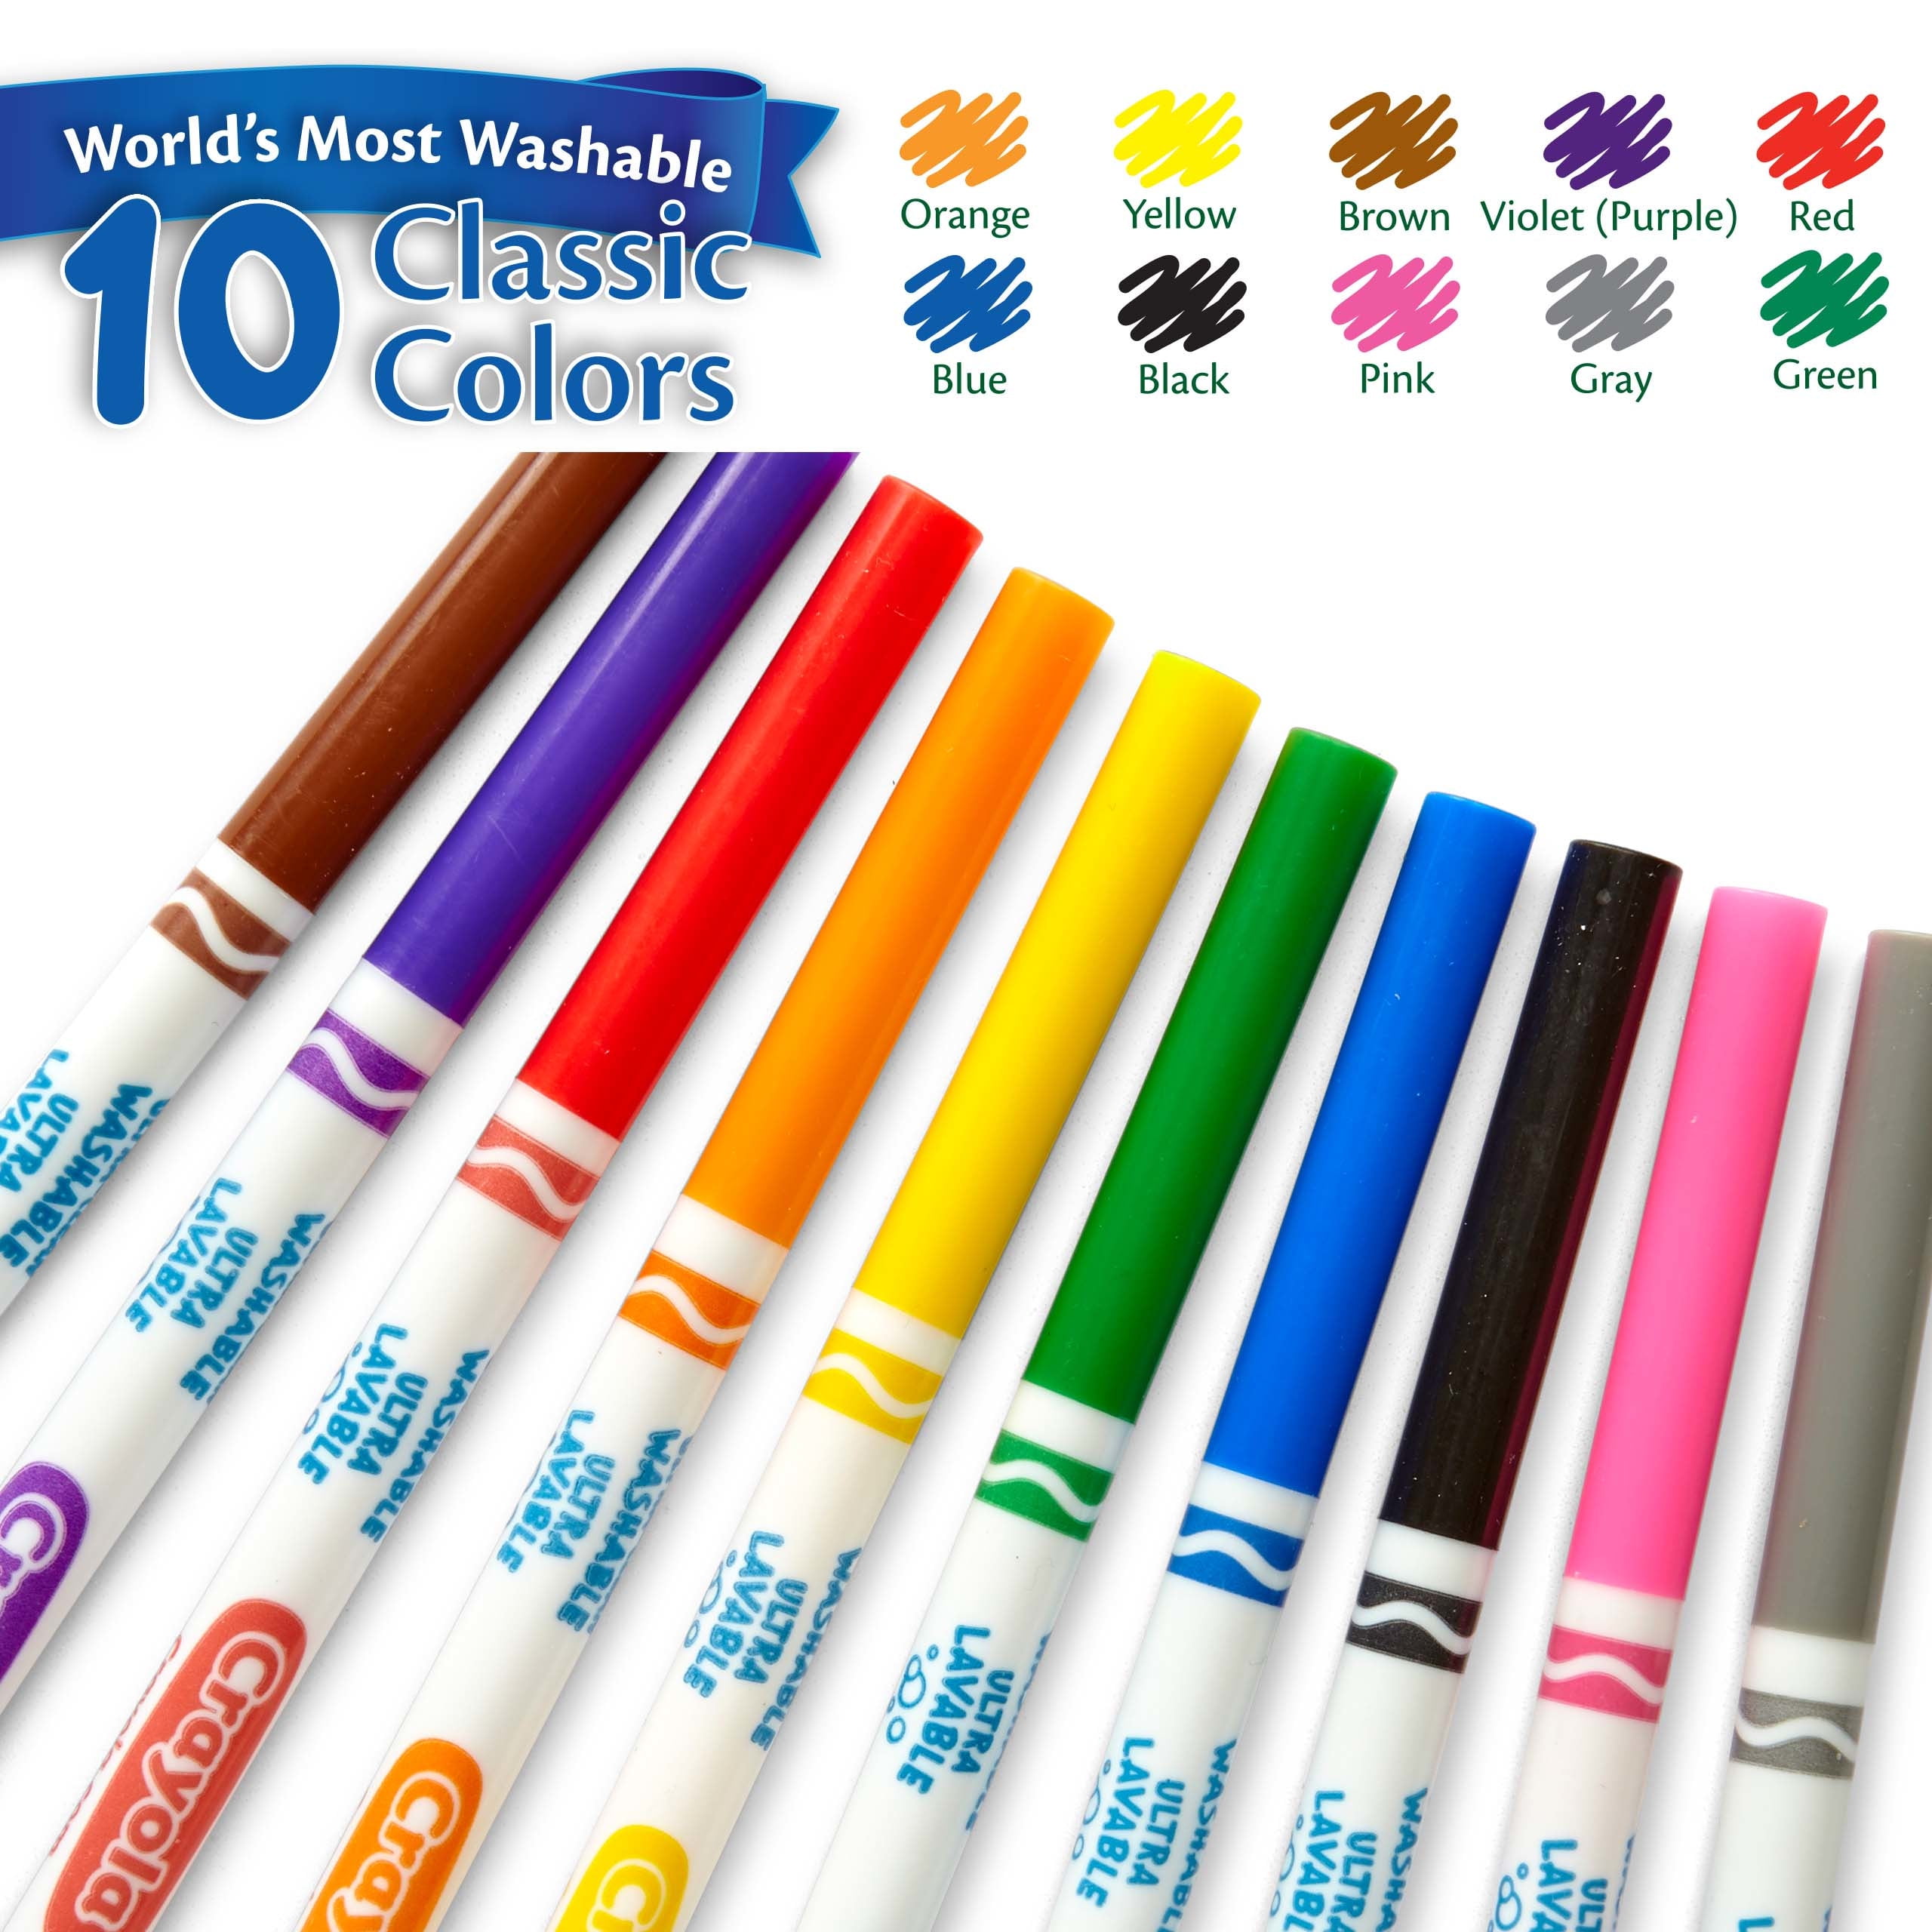 Crayola Fine Line Markers 10 Long Lasting Brilliant Colors A52-2